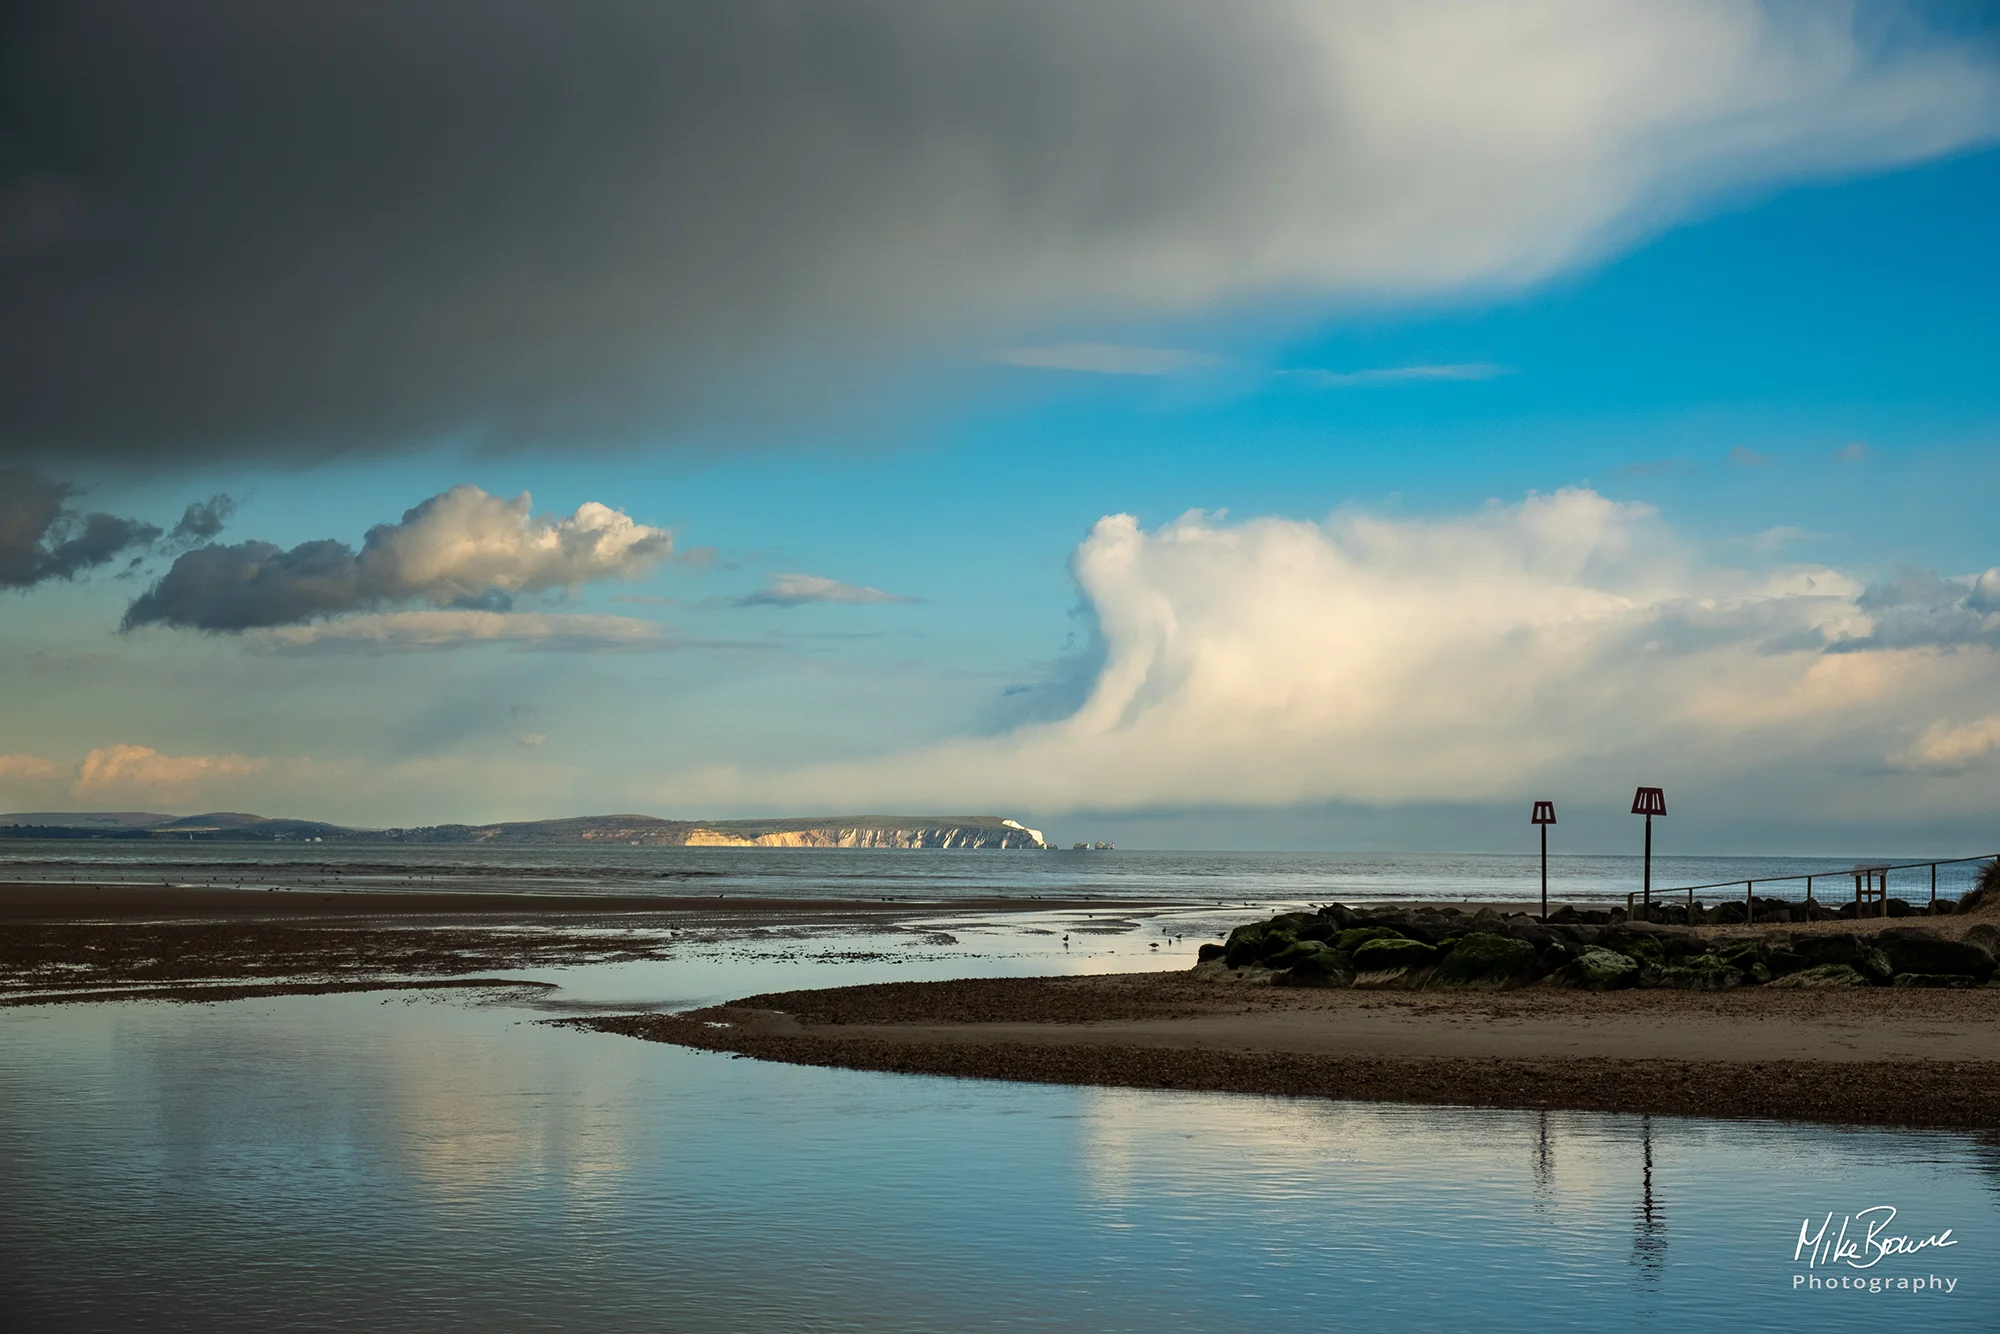 Estuary at low tide with Isle of Wight, blue sky and clouds in background